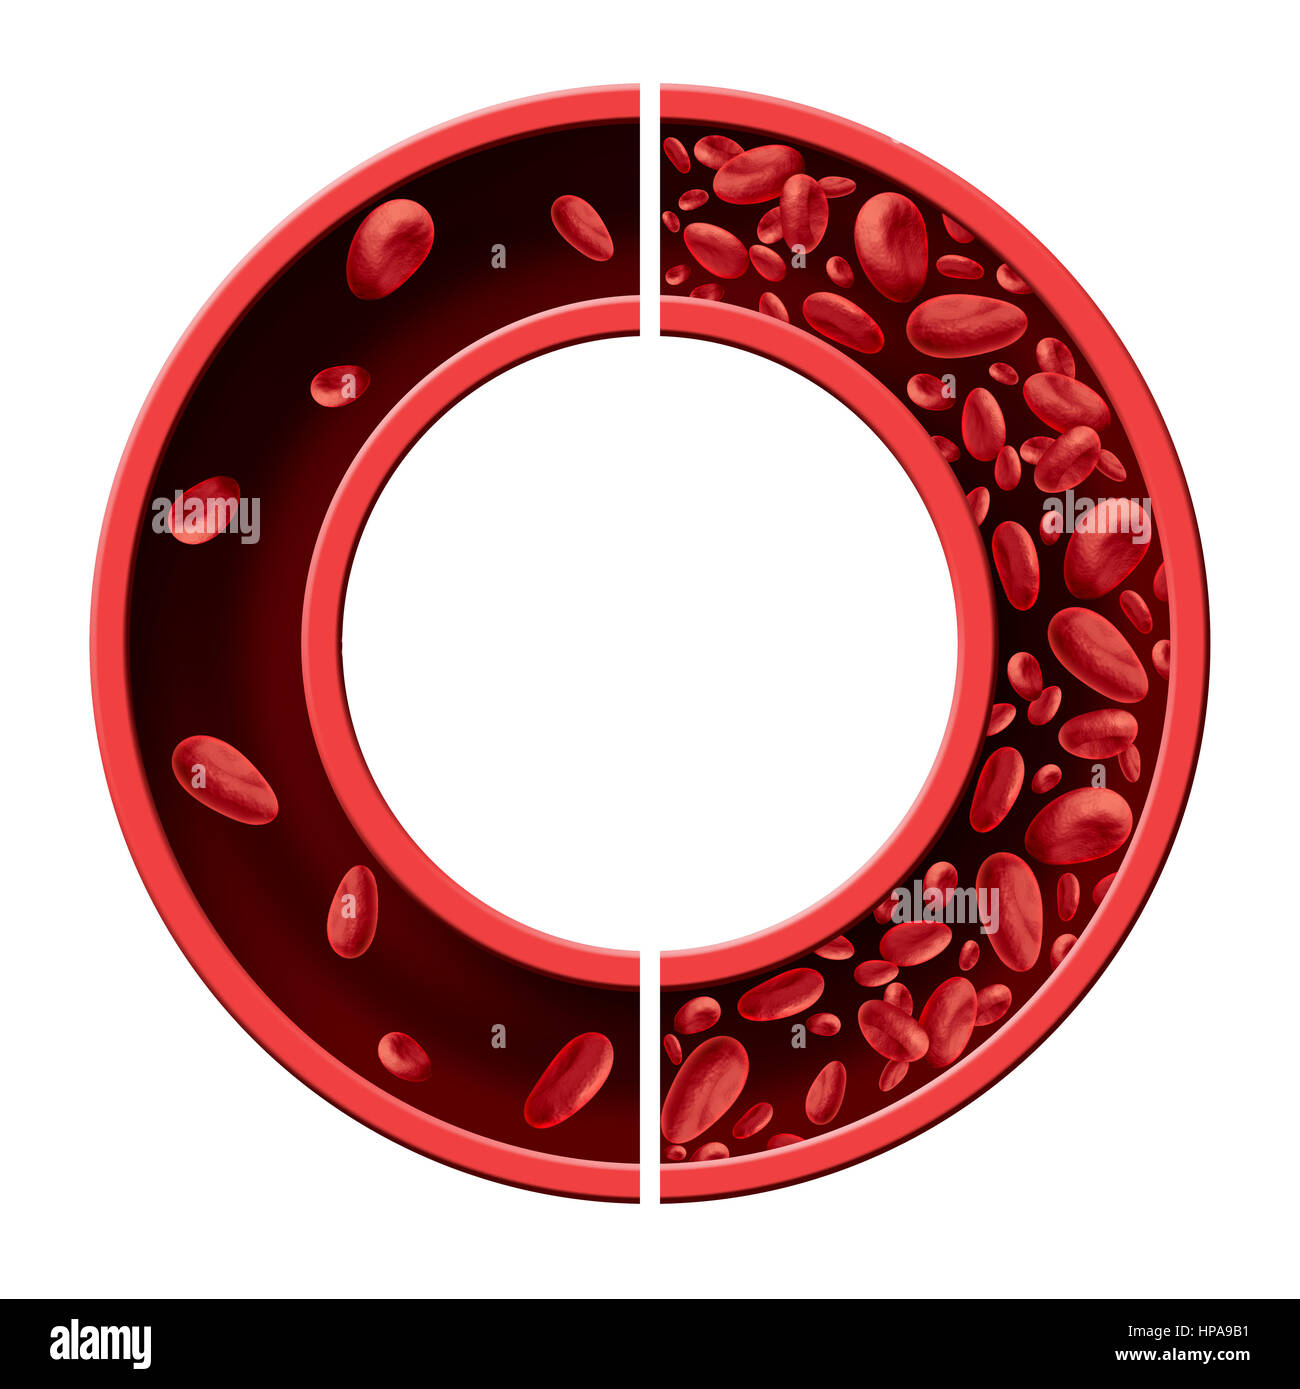 Anemia and anaemia medical diagram concept as normal and abnormal blood cell count and human circulation in an artery or vein. Stock Photo